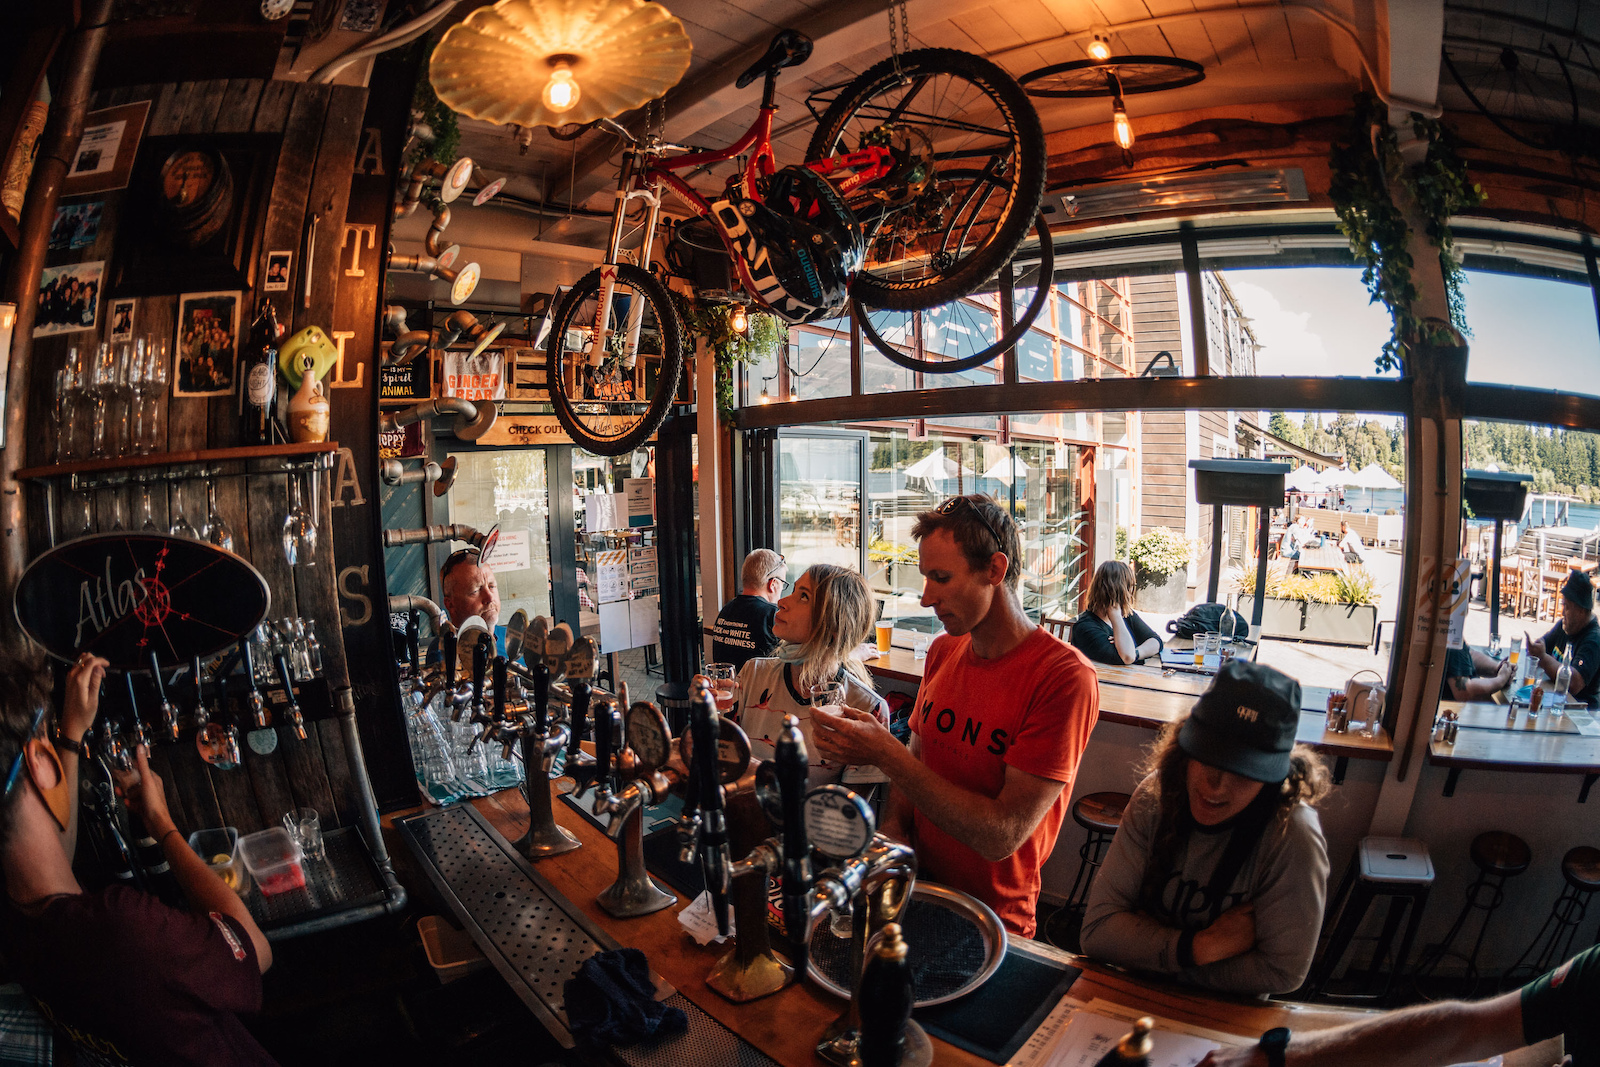 Inside Atlas one of the coolest places in Queenstown. Note Kelly McGarry s bike hanging from the ceiling.